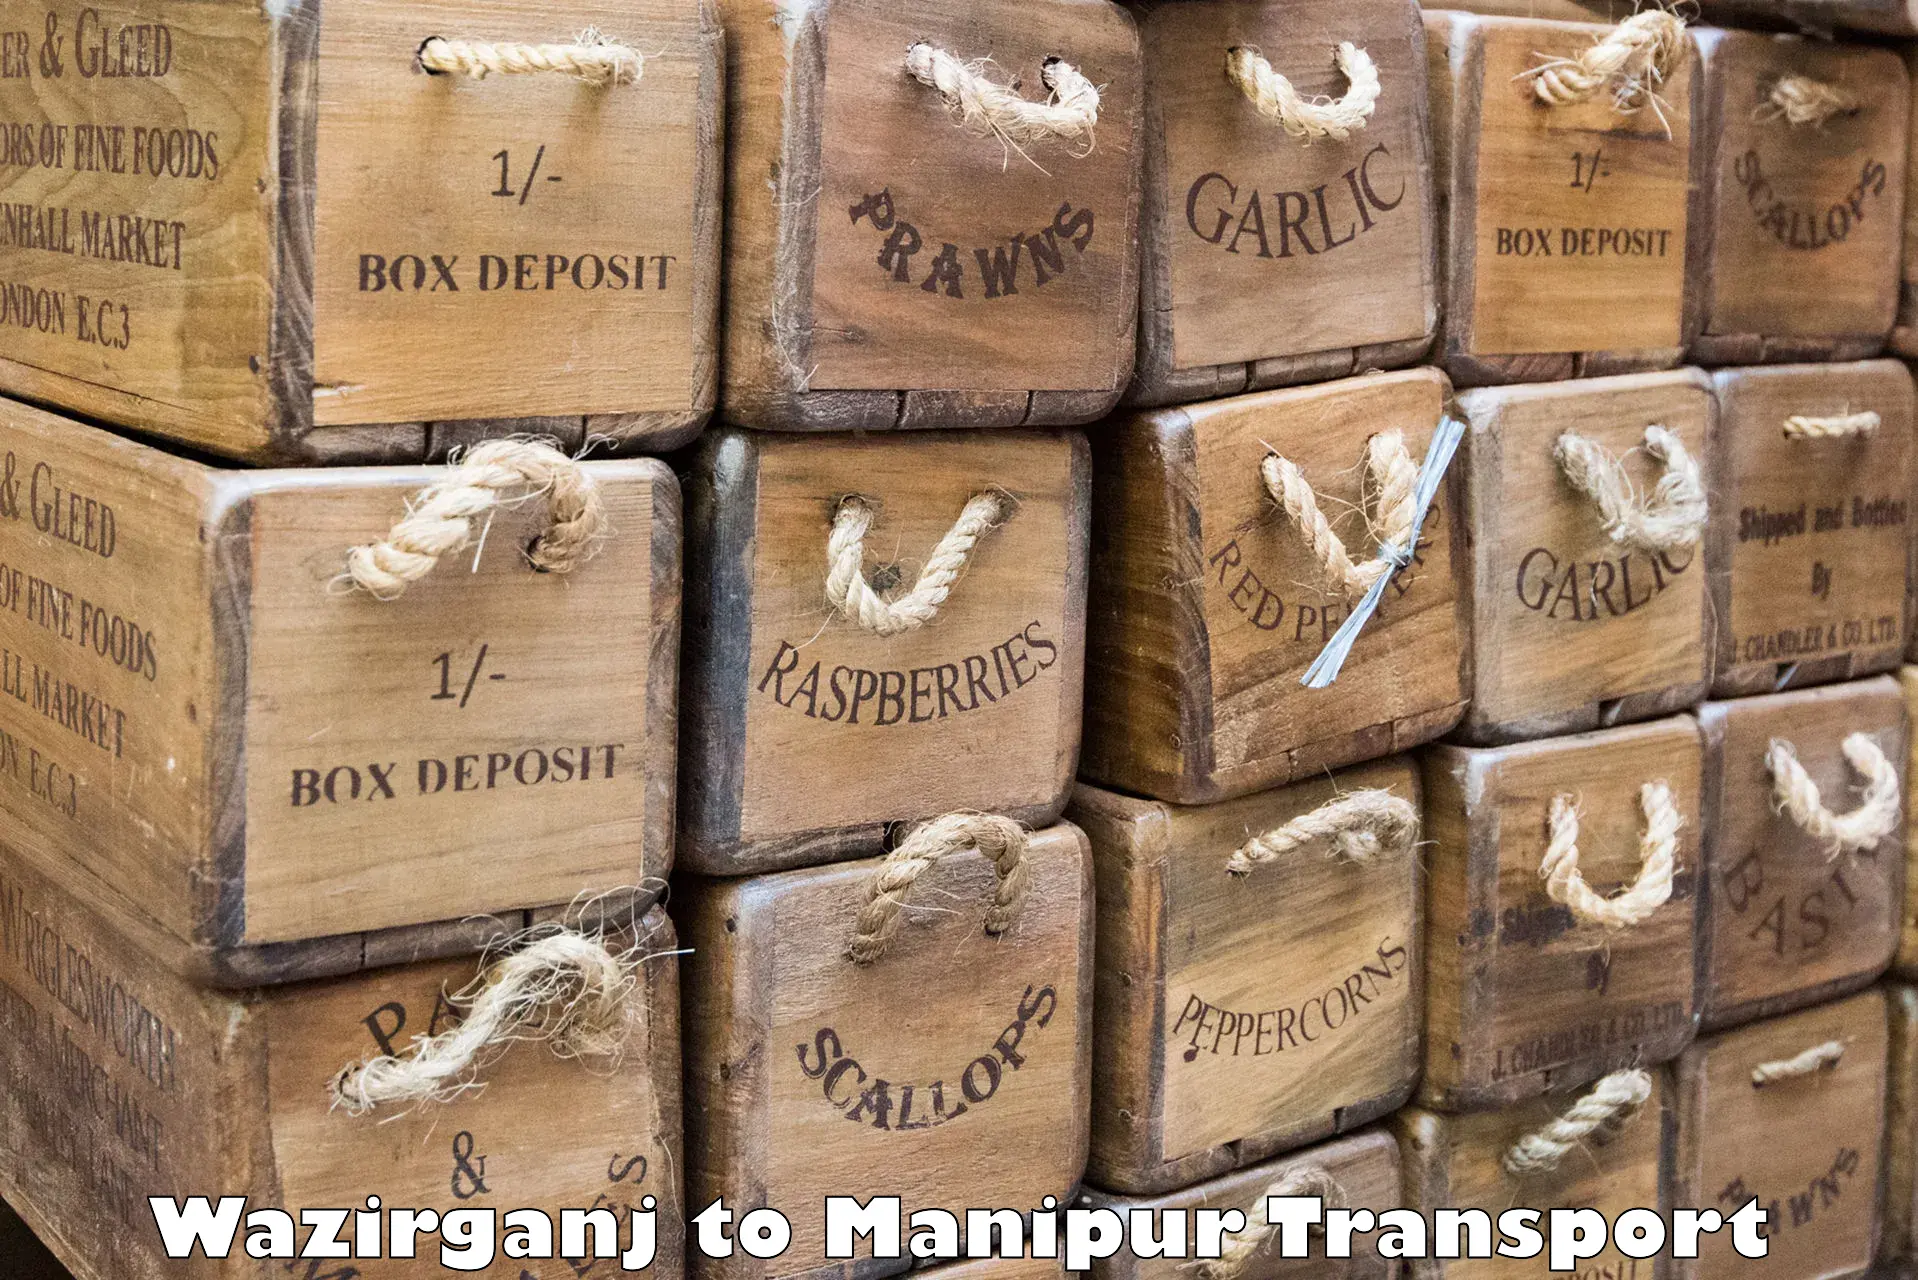 Container transport service Wazirganj to Manipur